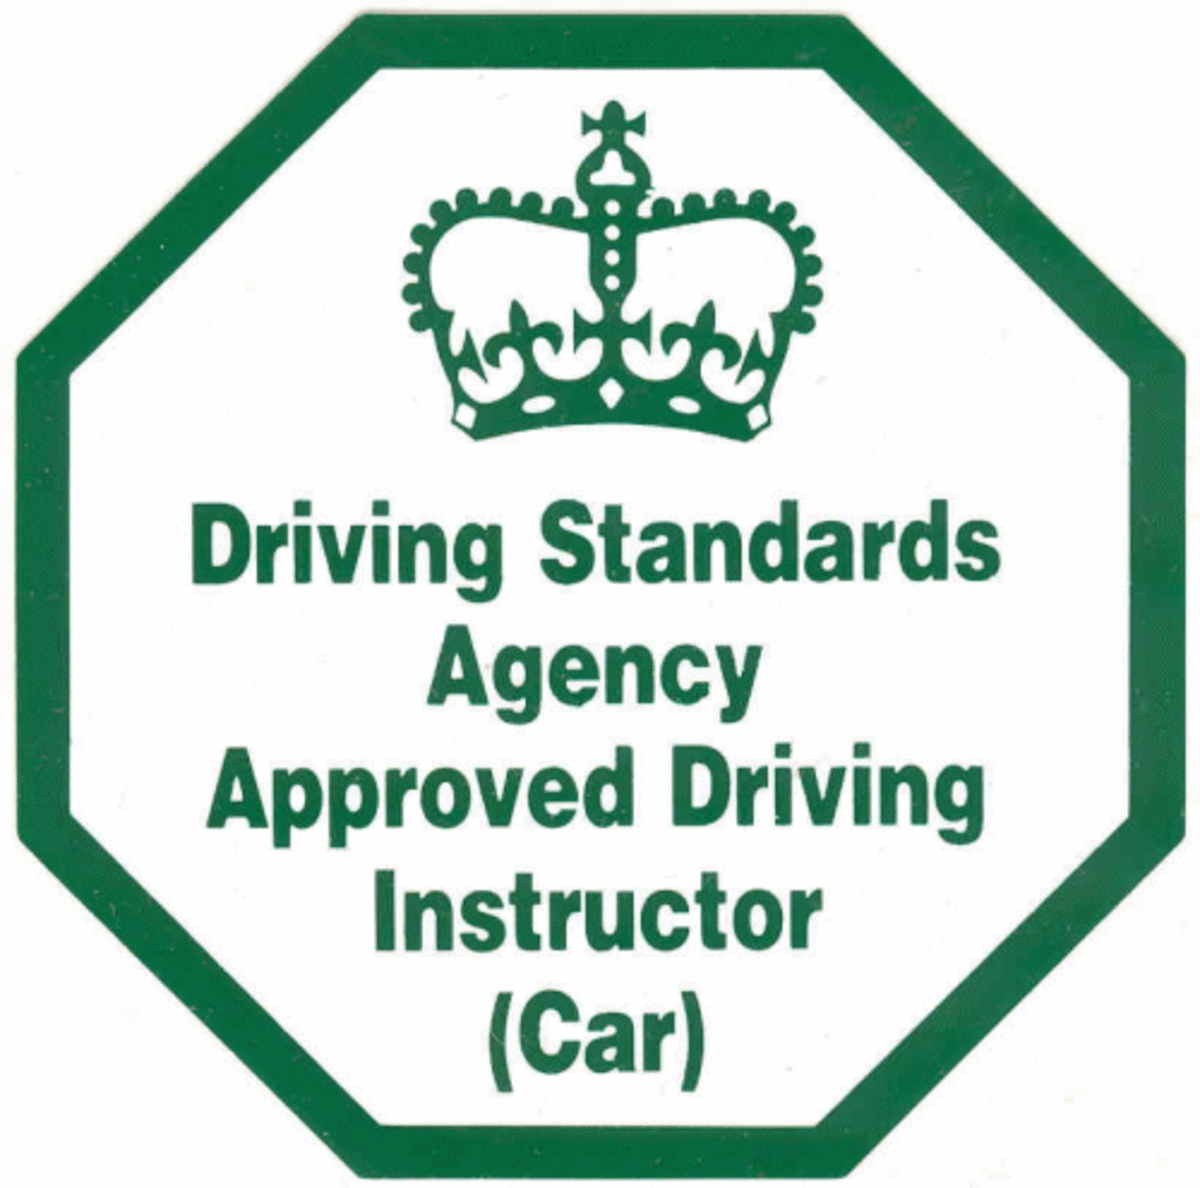 Driving instructor grades - are they a true reflection of how "good" an instructor is?